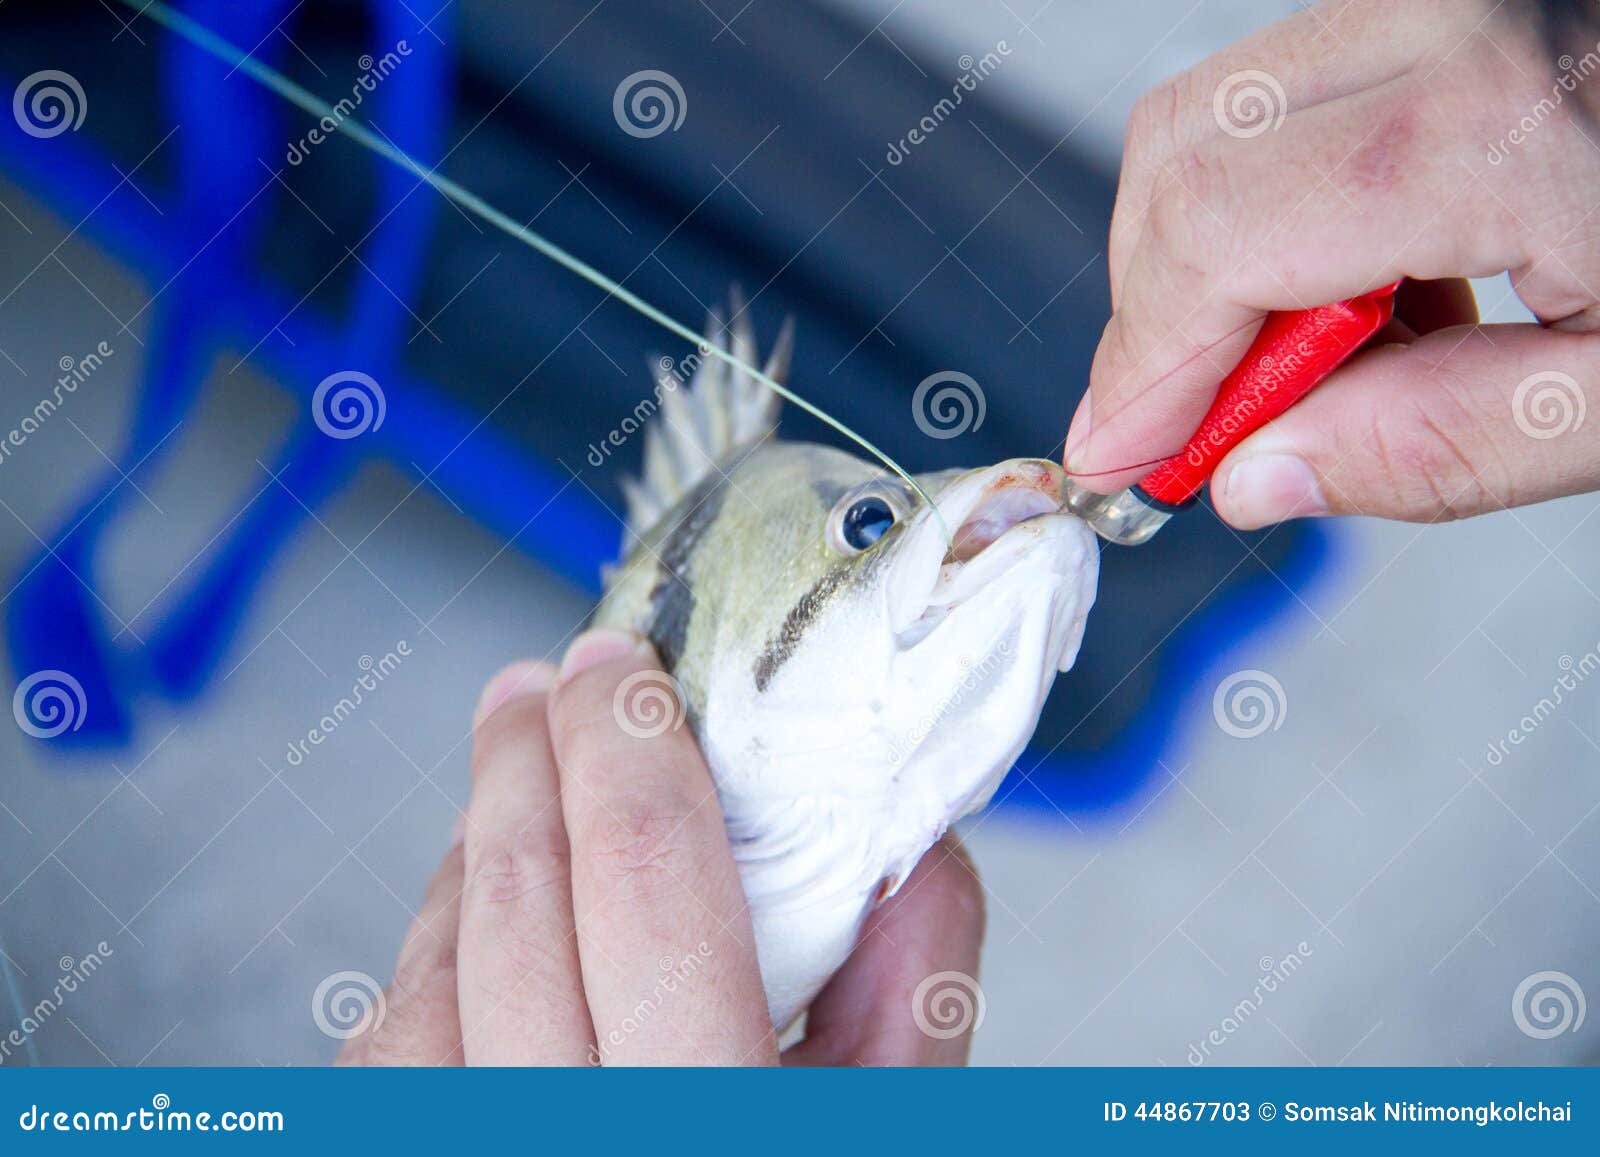 Human Hand Try To Remove Hook from Fish S Mouth Stock Image